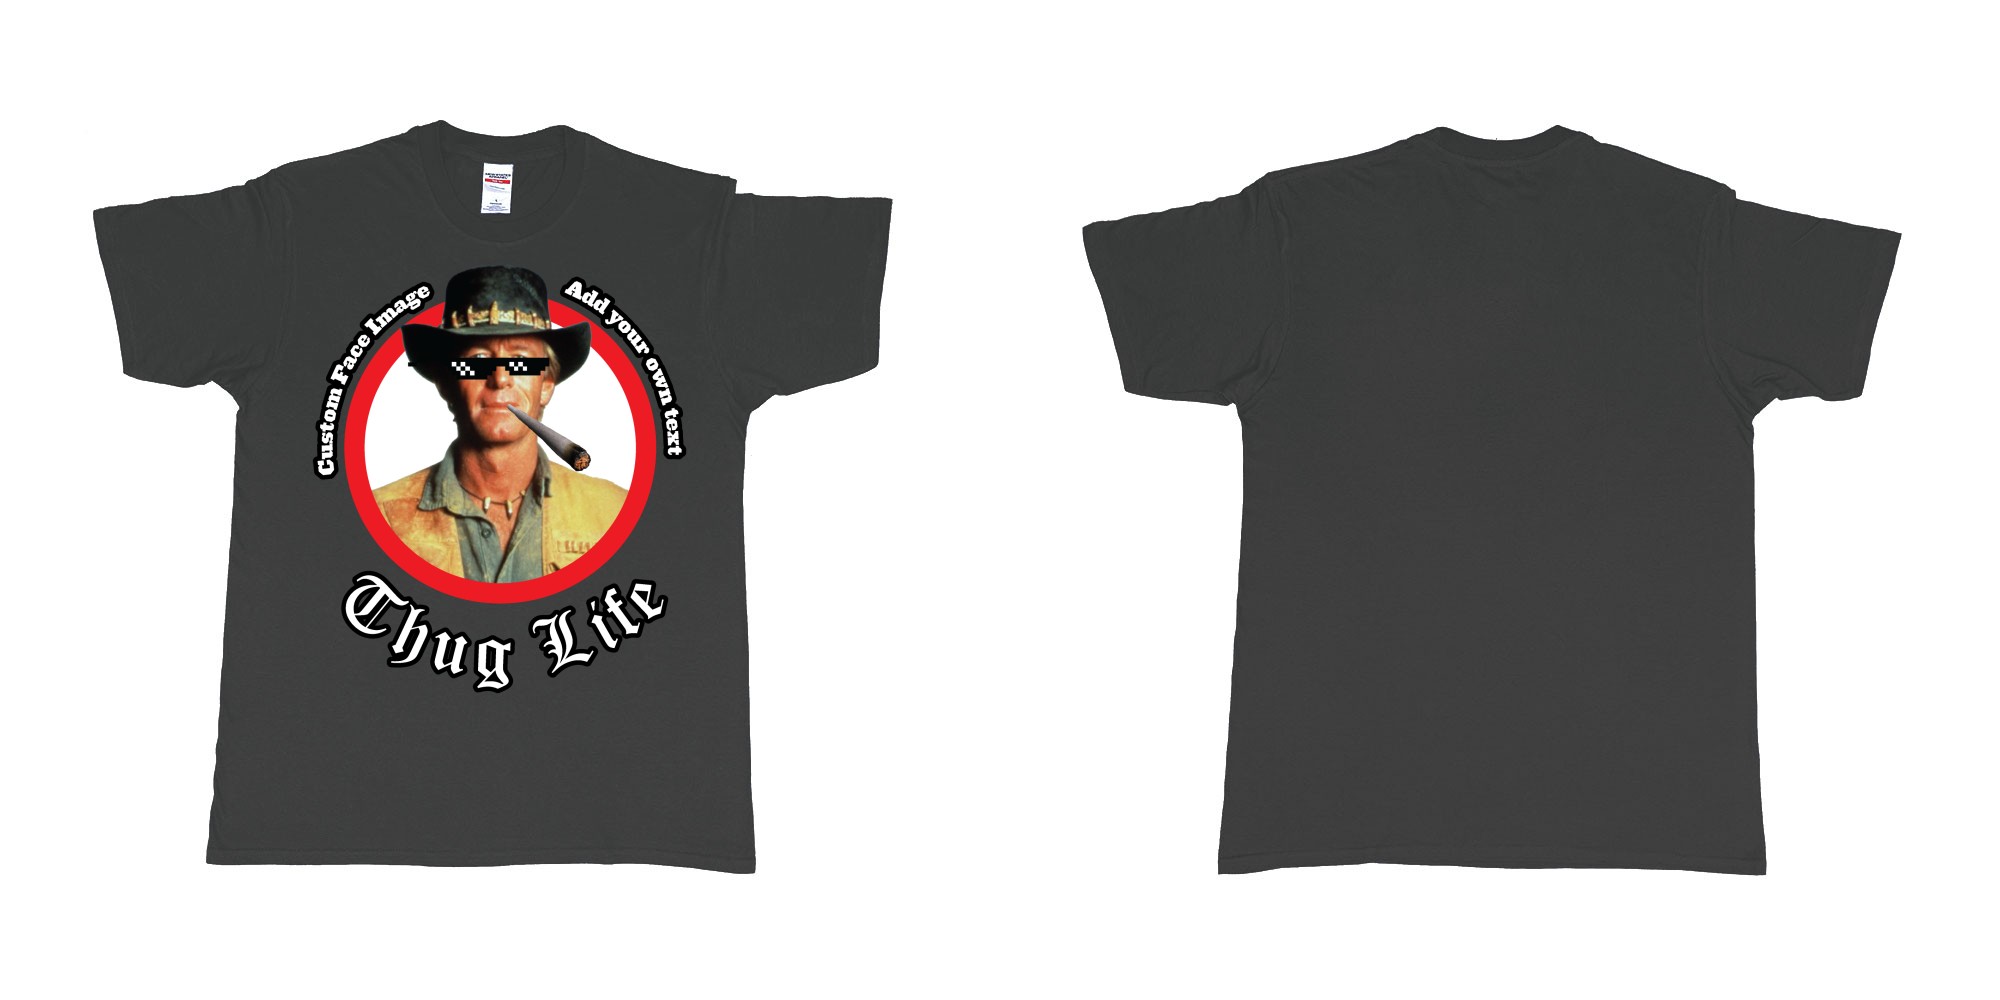 Custom tshirt design thug life meme sunglasses joint custom image in fabric color black choice your own text made in Bali by The Pirate Way